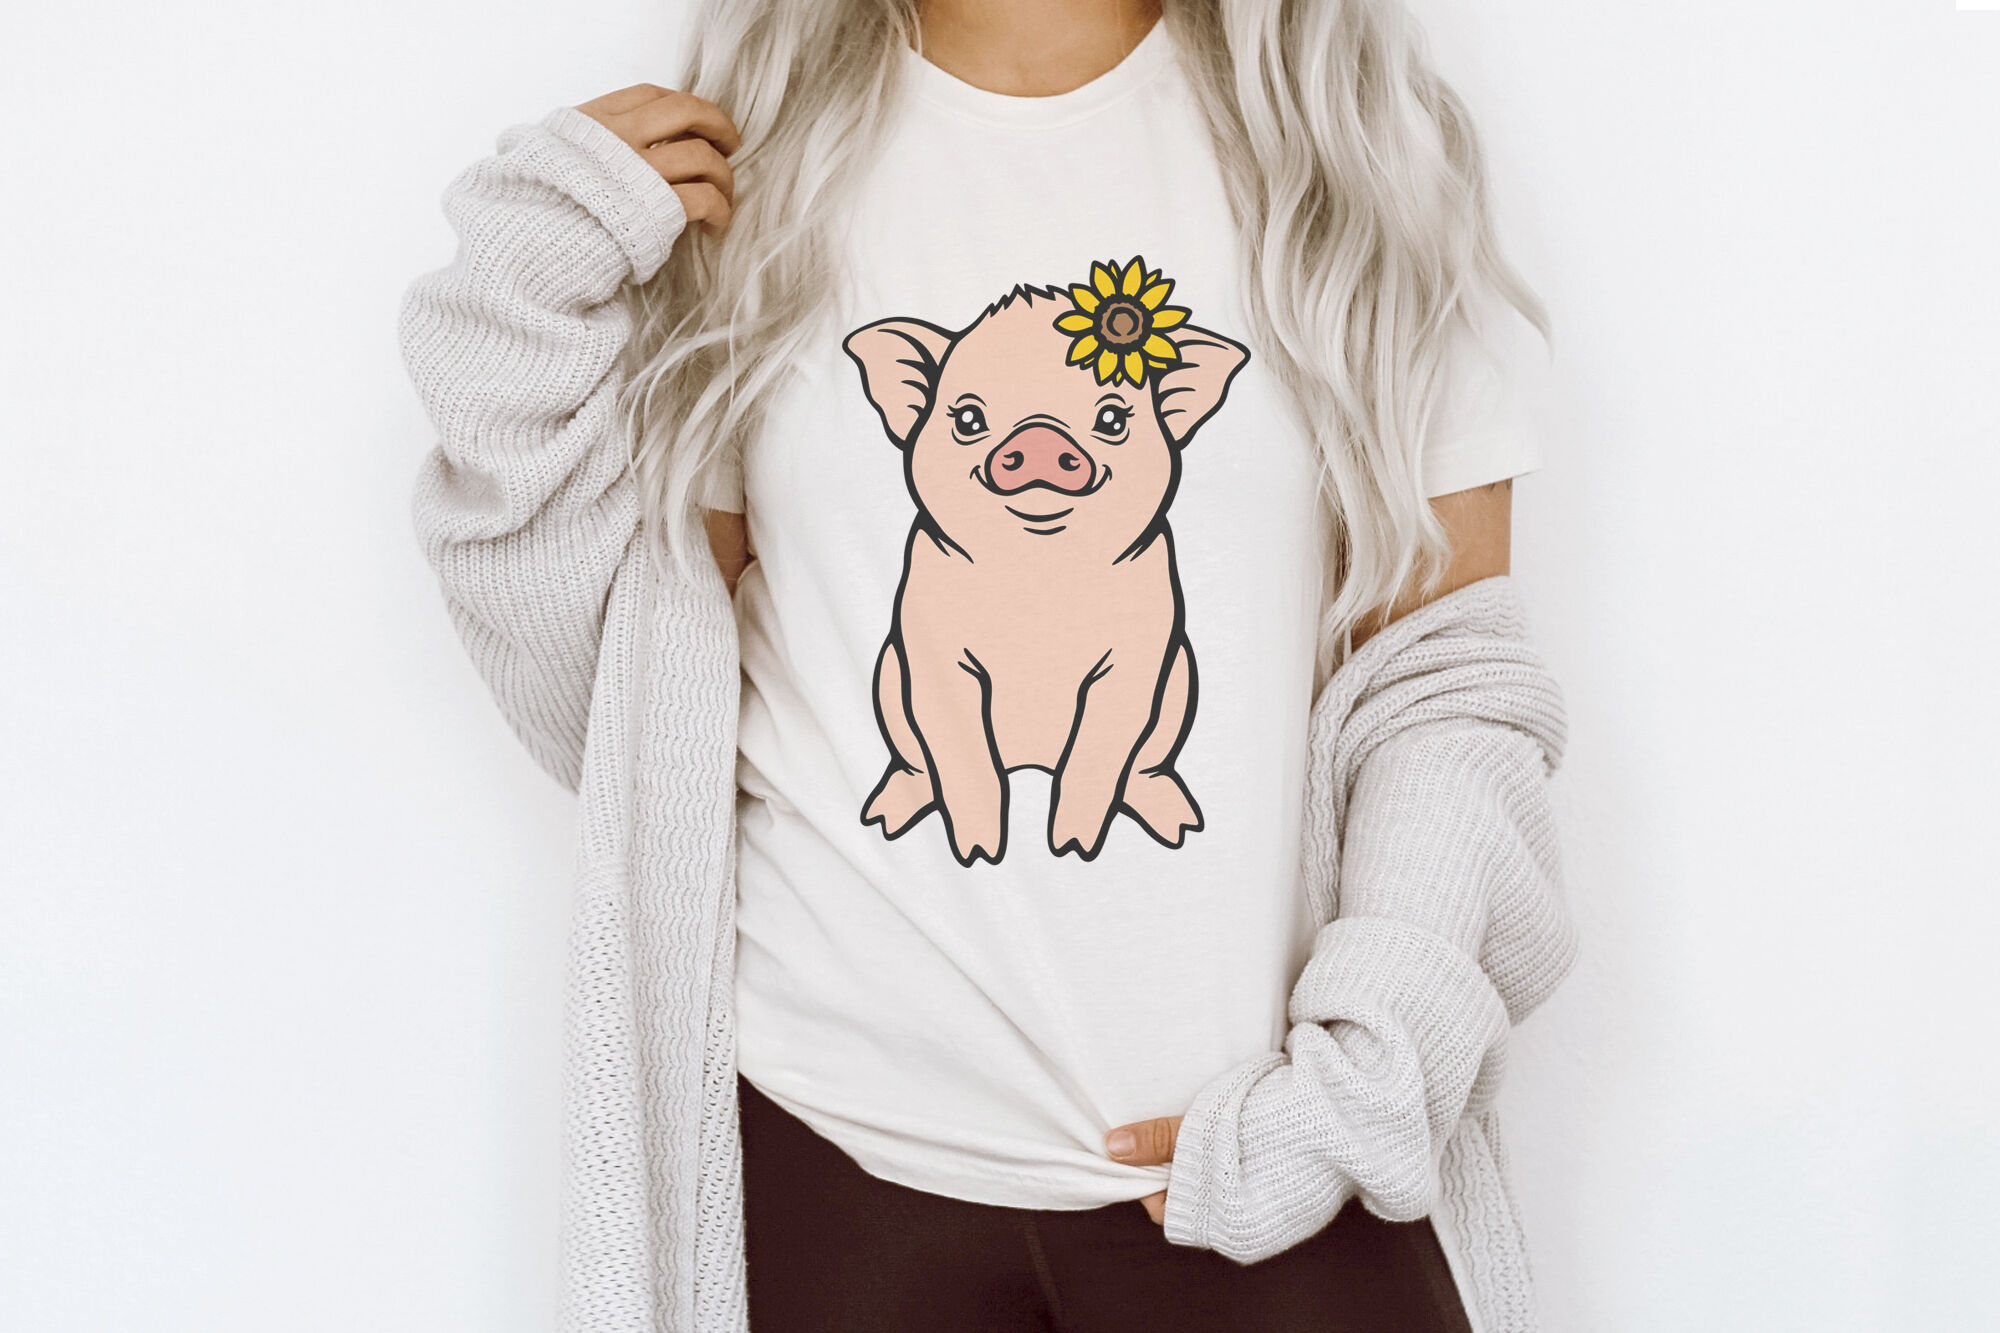 Download Pig Svg Farm Animals Svg Farmhouse Svg Layered Svg Files For Cricut By Green Wolf Art Thehungryjpeg Com SVG, PNG, EPS, DXF File